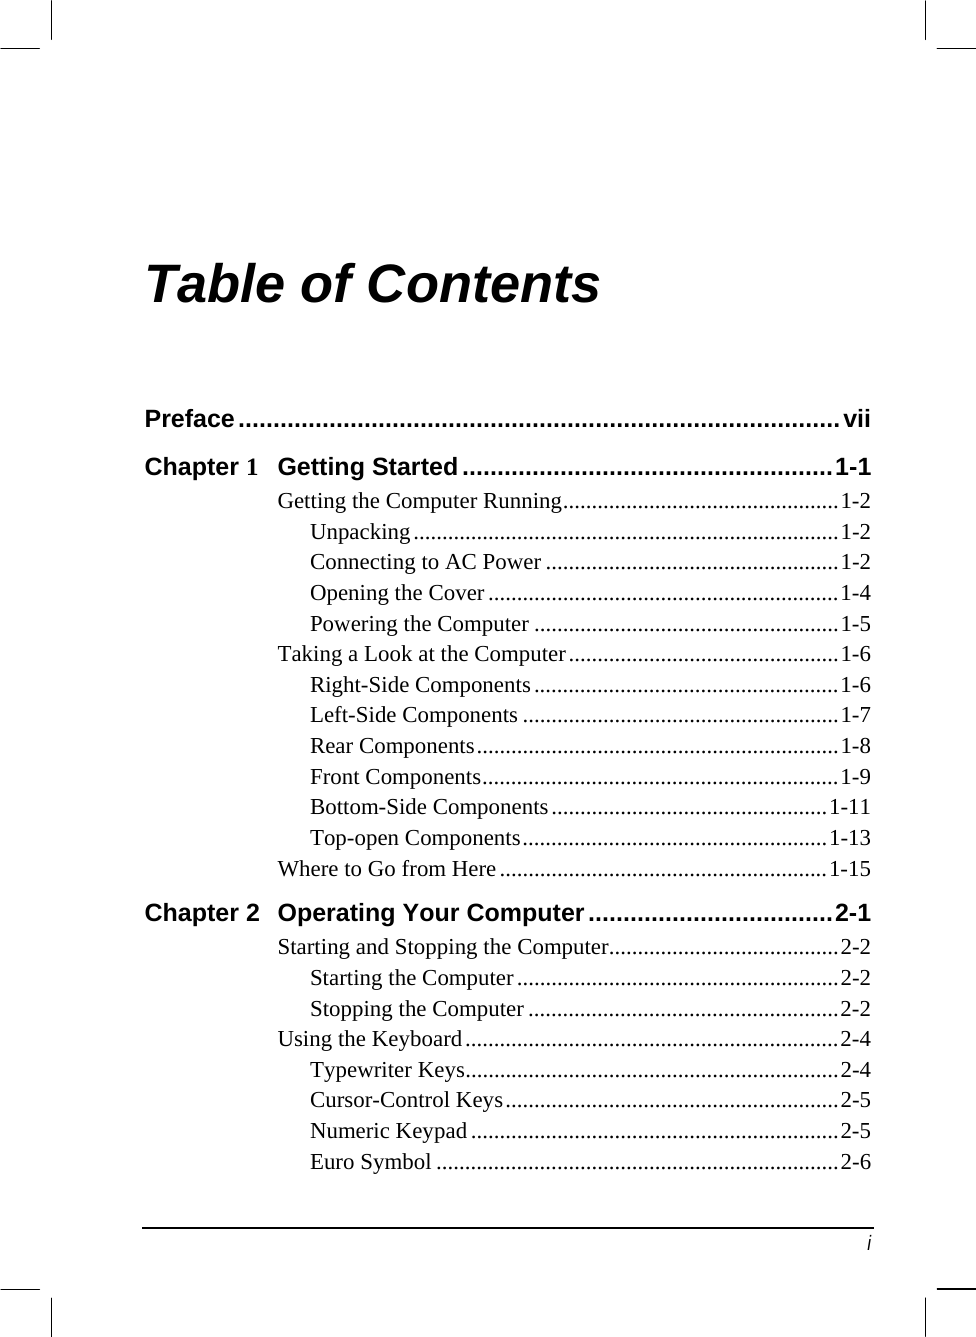  Table of Contents Preface......................................................................................vii Chapter 1  Getting Started.....................................................1-1 Getting the Computer Running................................................1-2 Unpacking..........................................................................1-2 Connecting to AC Power ...................................................1-2 Opening the Cover.............................................................1-4 Powering the Computer .....................................................1-5 Taking a Look at the Computer...............................................1-6 Right-Side Components.....................................................1-6 Left-Side Components .......................................................1-7 Rear Components...............................................................1-8 Front Components..............................................................1-9 Bottom-Side Components................................................1-11 Top-open Components.....................................................1-13 Where to Go from Here.........................................................1-15 Chapter 2  Operating Your Computer...................................2-1 Starting and Stopping the Computer........................................2-2 Starting the Computer........................................................2-2 Stopping the Computer ......................................................2-2 Using the Keyboard.................................................................2-4 Typewriter Keys.................................................................2-4 Cursor-Control Keys..........................................................2-5 Numeric Keypad ................................................................2-5 Euro Symbol ......................................................................2-6  i 